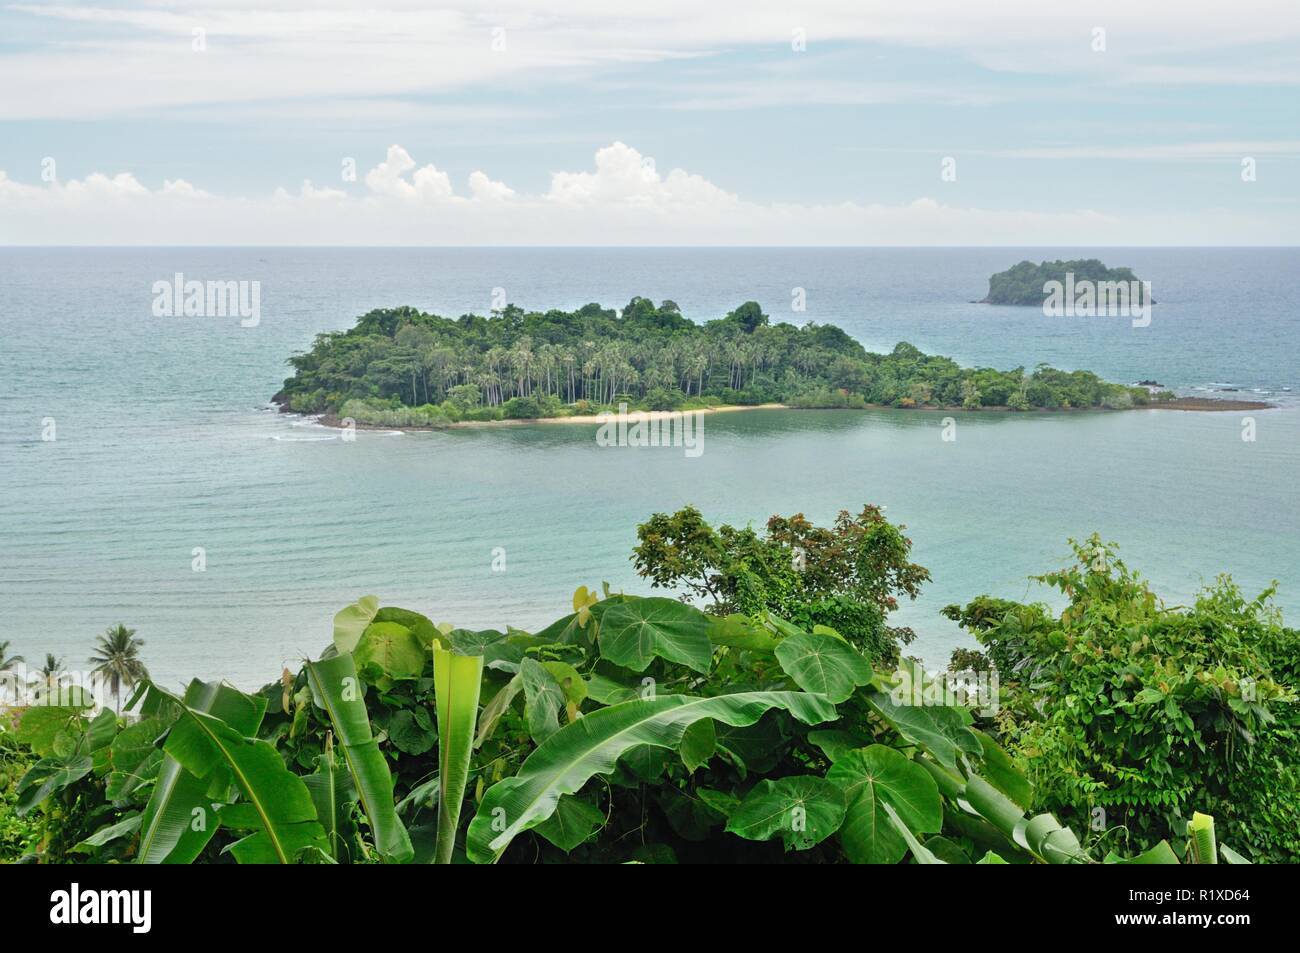 Tropical landscape with turquoise sea and tropical islands on horizon near tropical Koh Chand island in Thailand Stock Photo